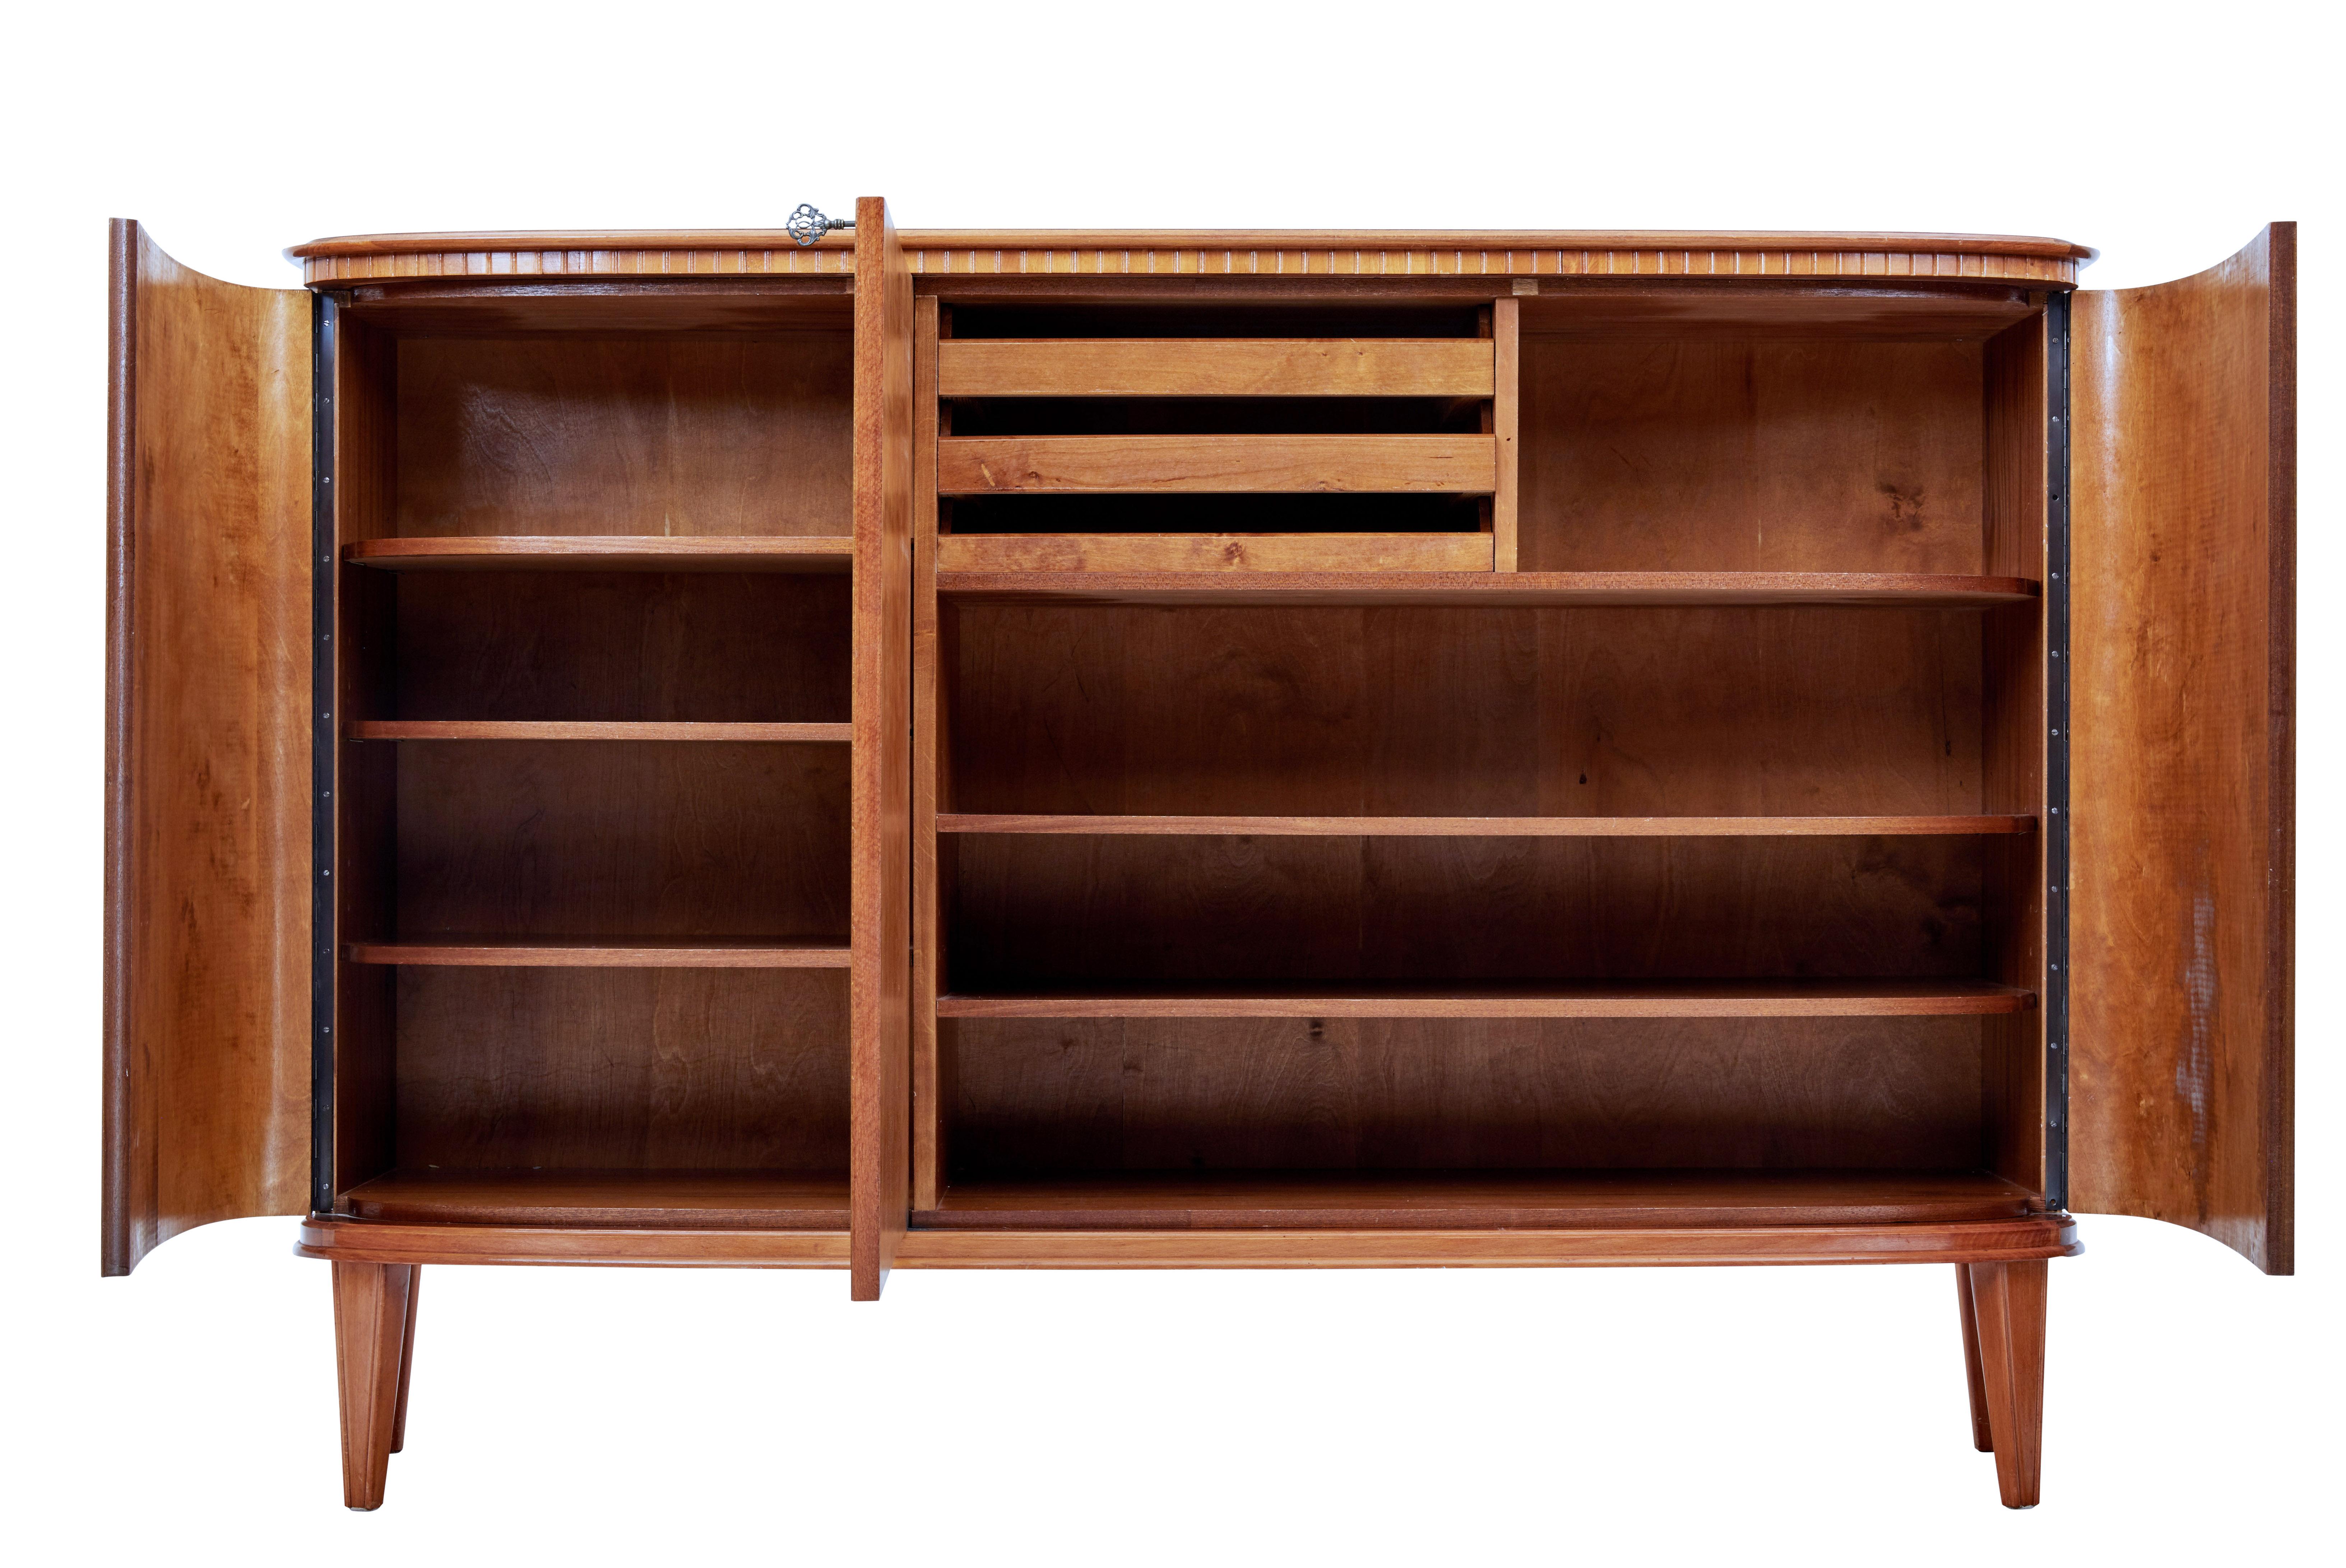 Striking 3-door sideboard, circa 1960.

Double door cupboard opens to reveal a partially fitted interior of 3-slide drawers and 3-shelves. Single door cupboard containing 3-shelves.

Matched flame mahogany used on the shaped doors with satinwood